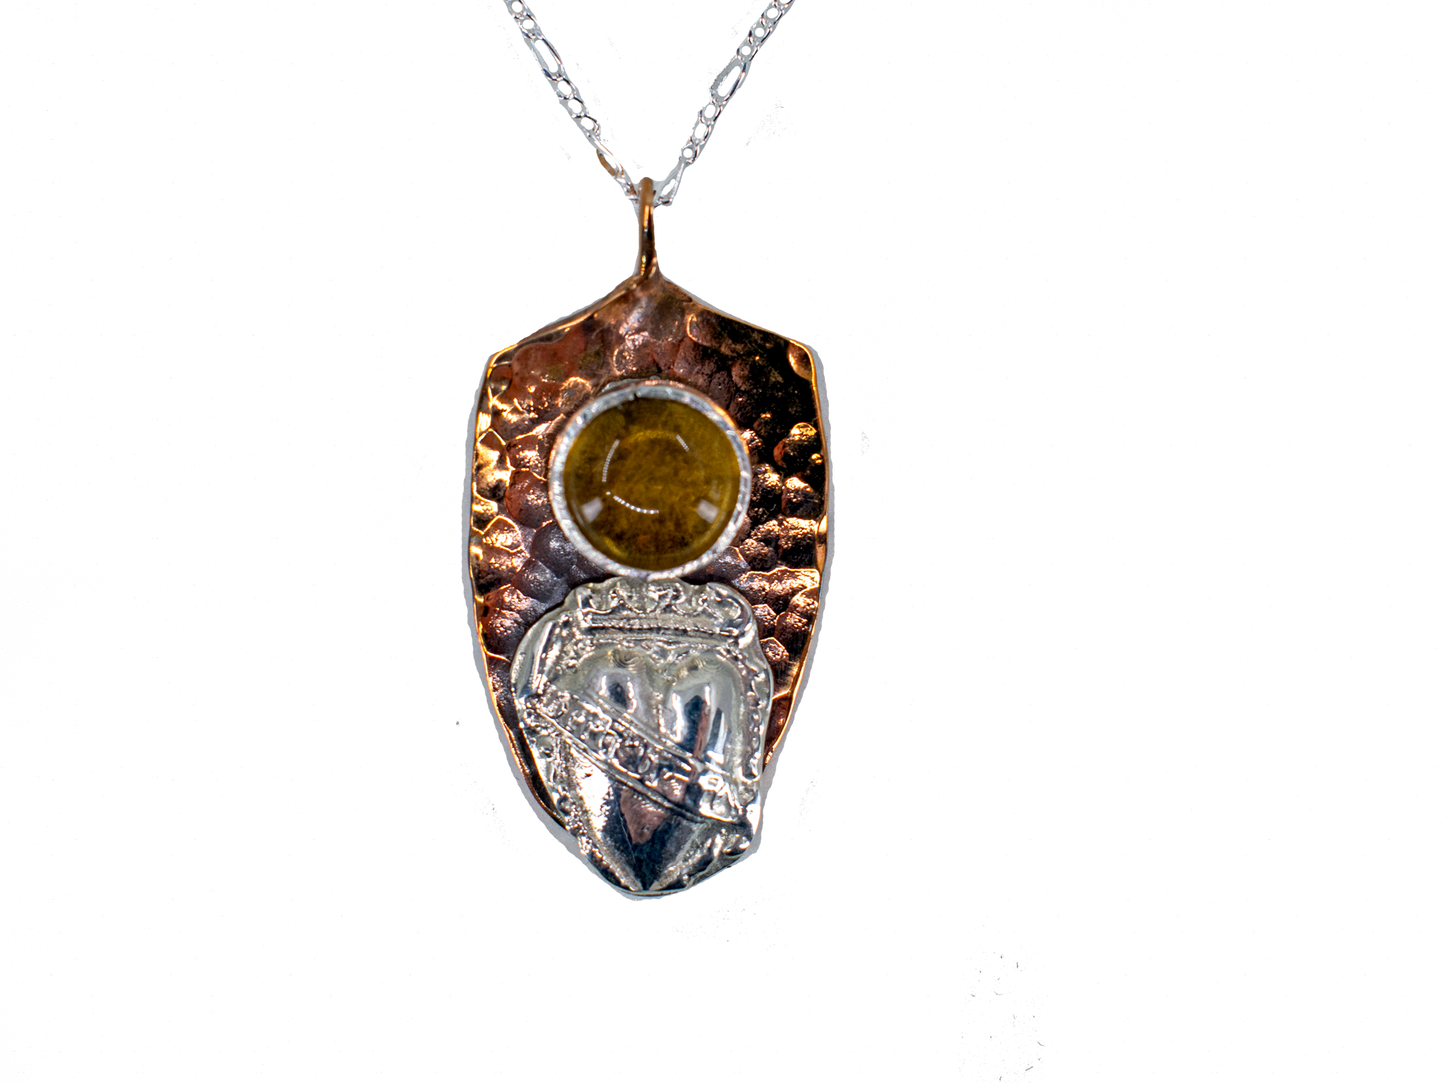 Heart and Citrine - Love - Handmade Silver Necklace